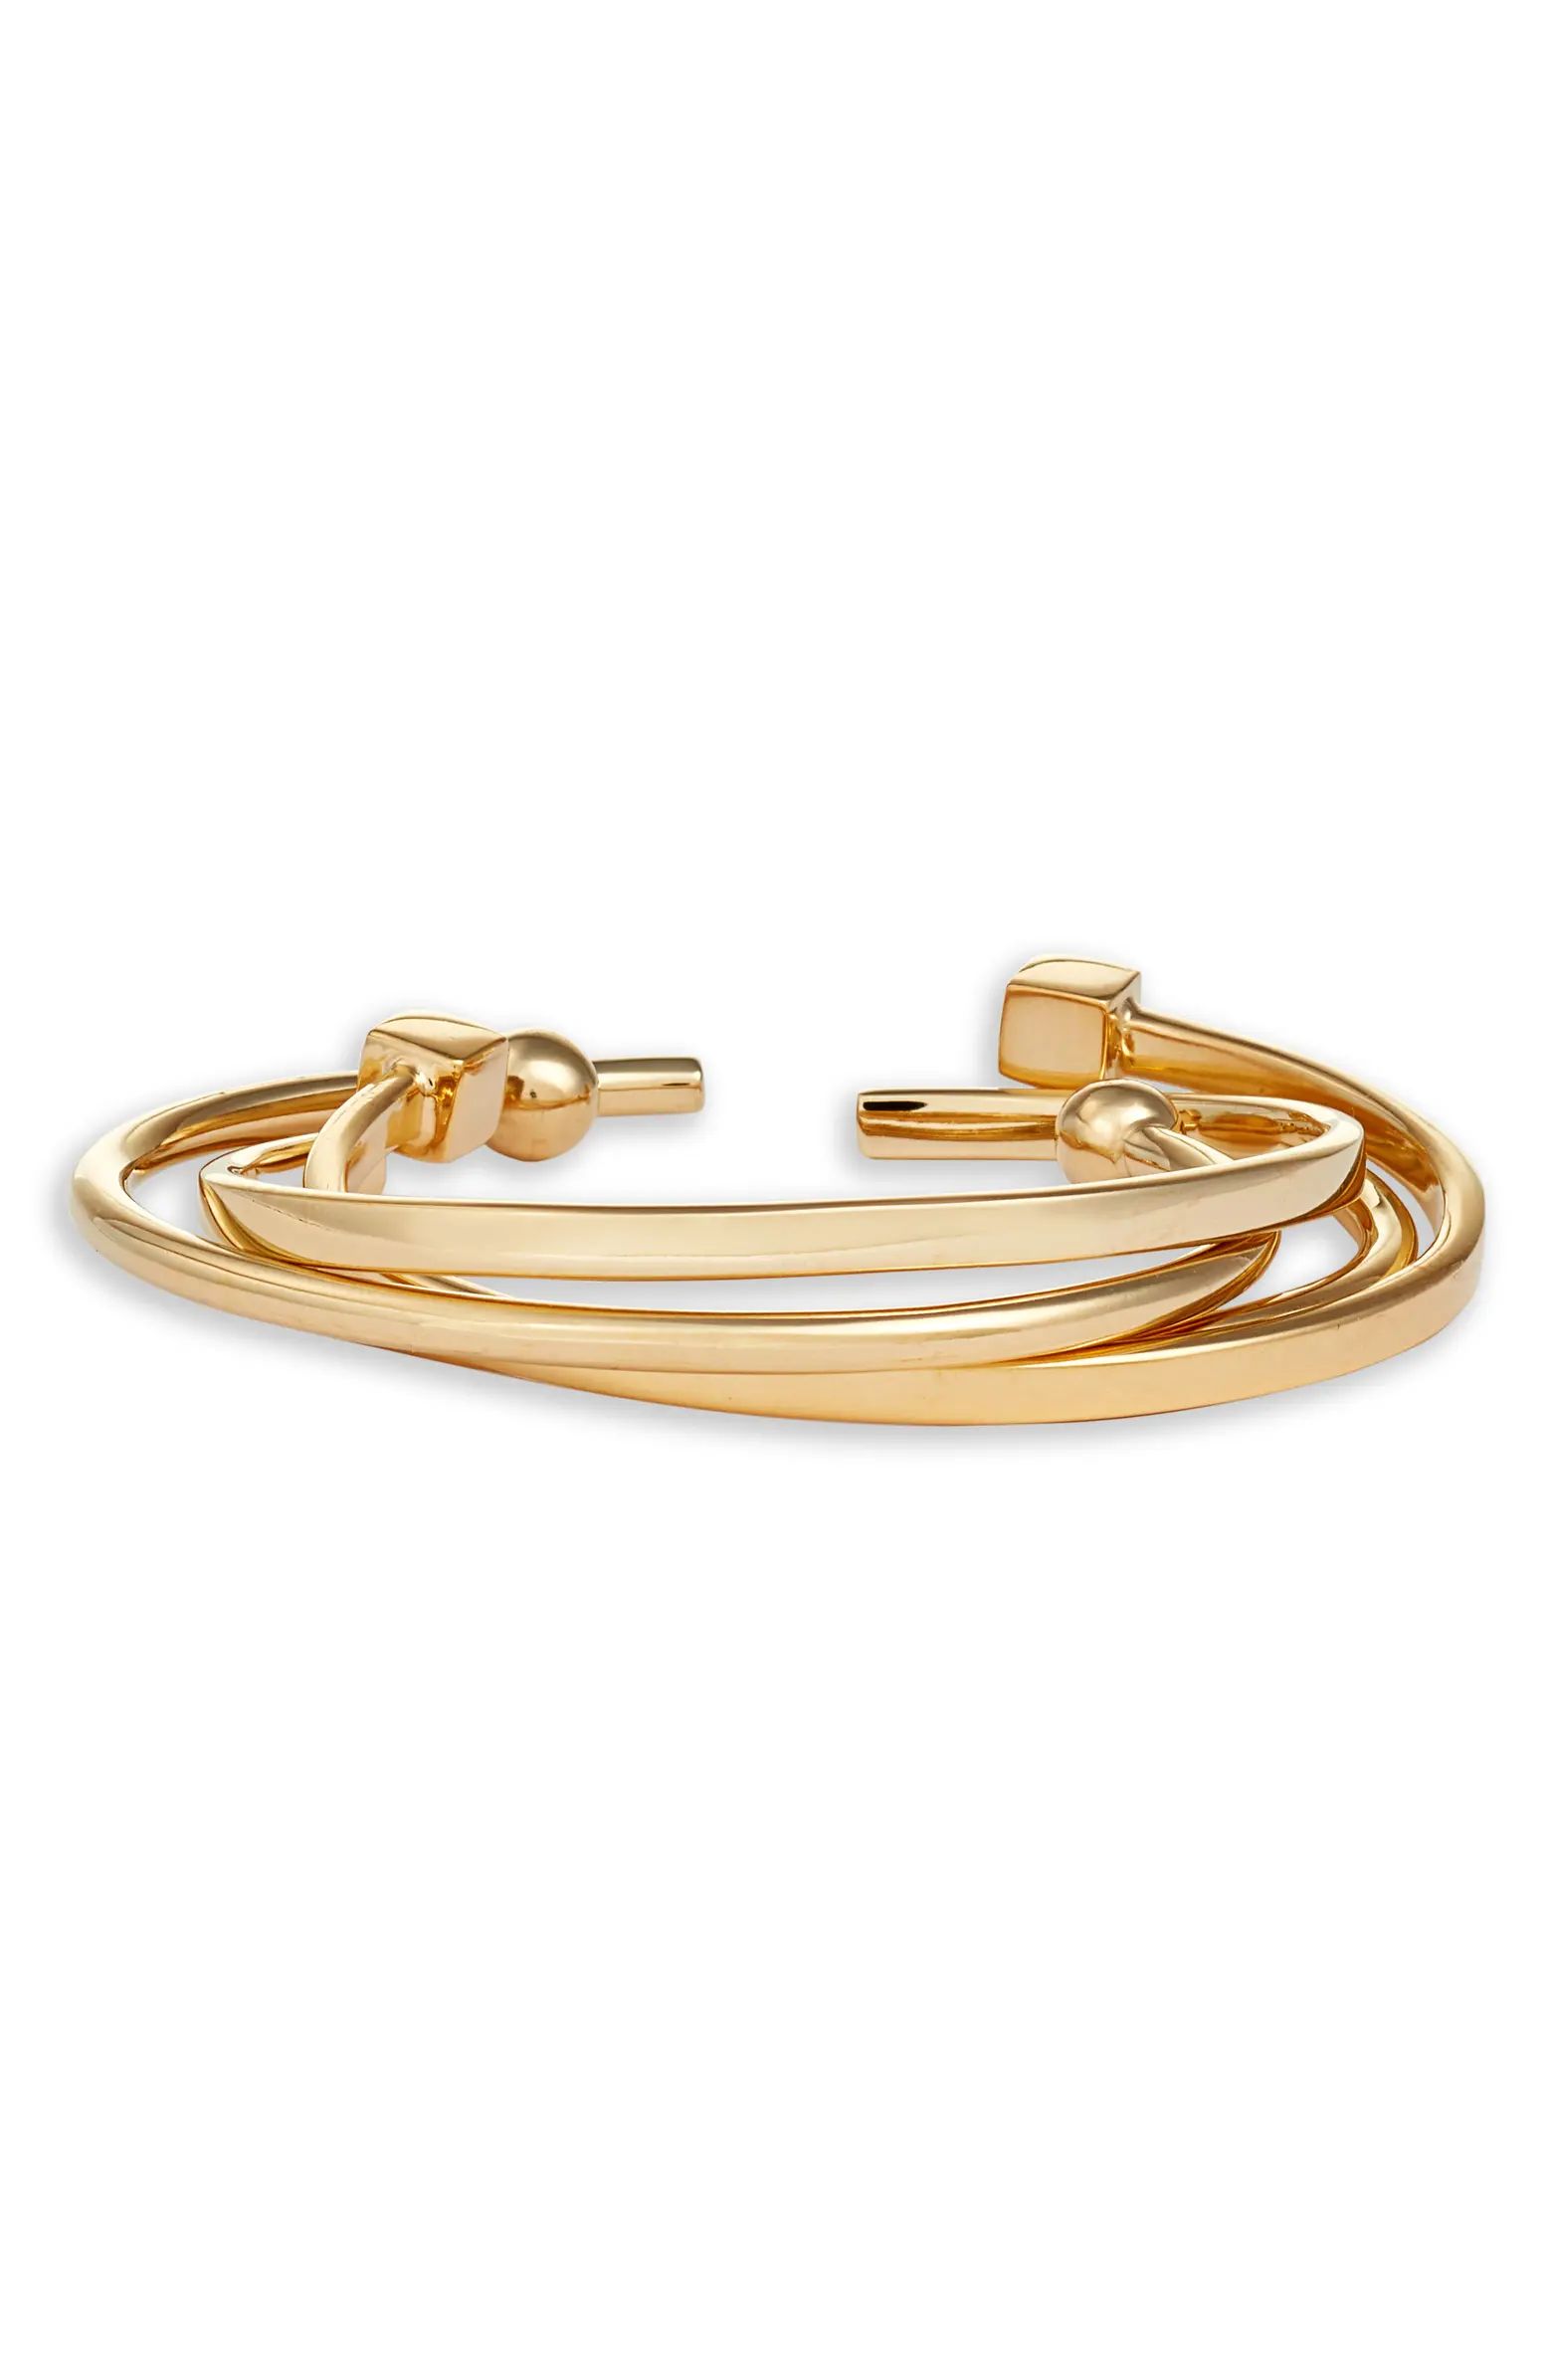 Set of 4 Mixed Shapes Stacking Cuffs | Nordstrom